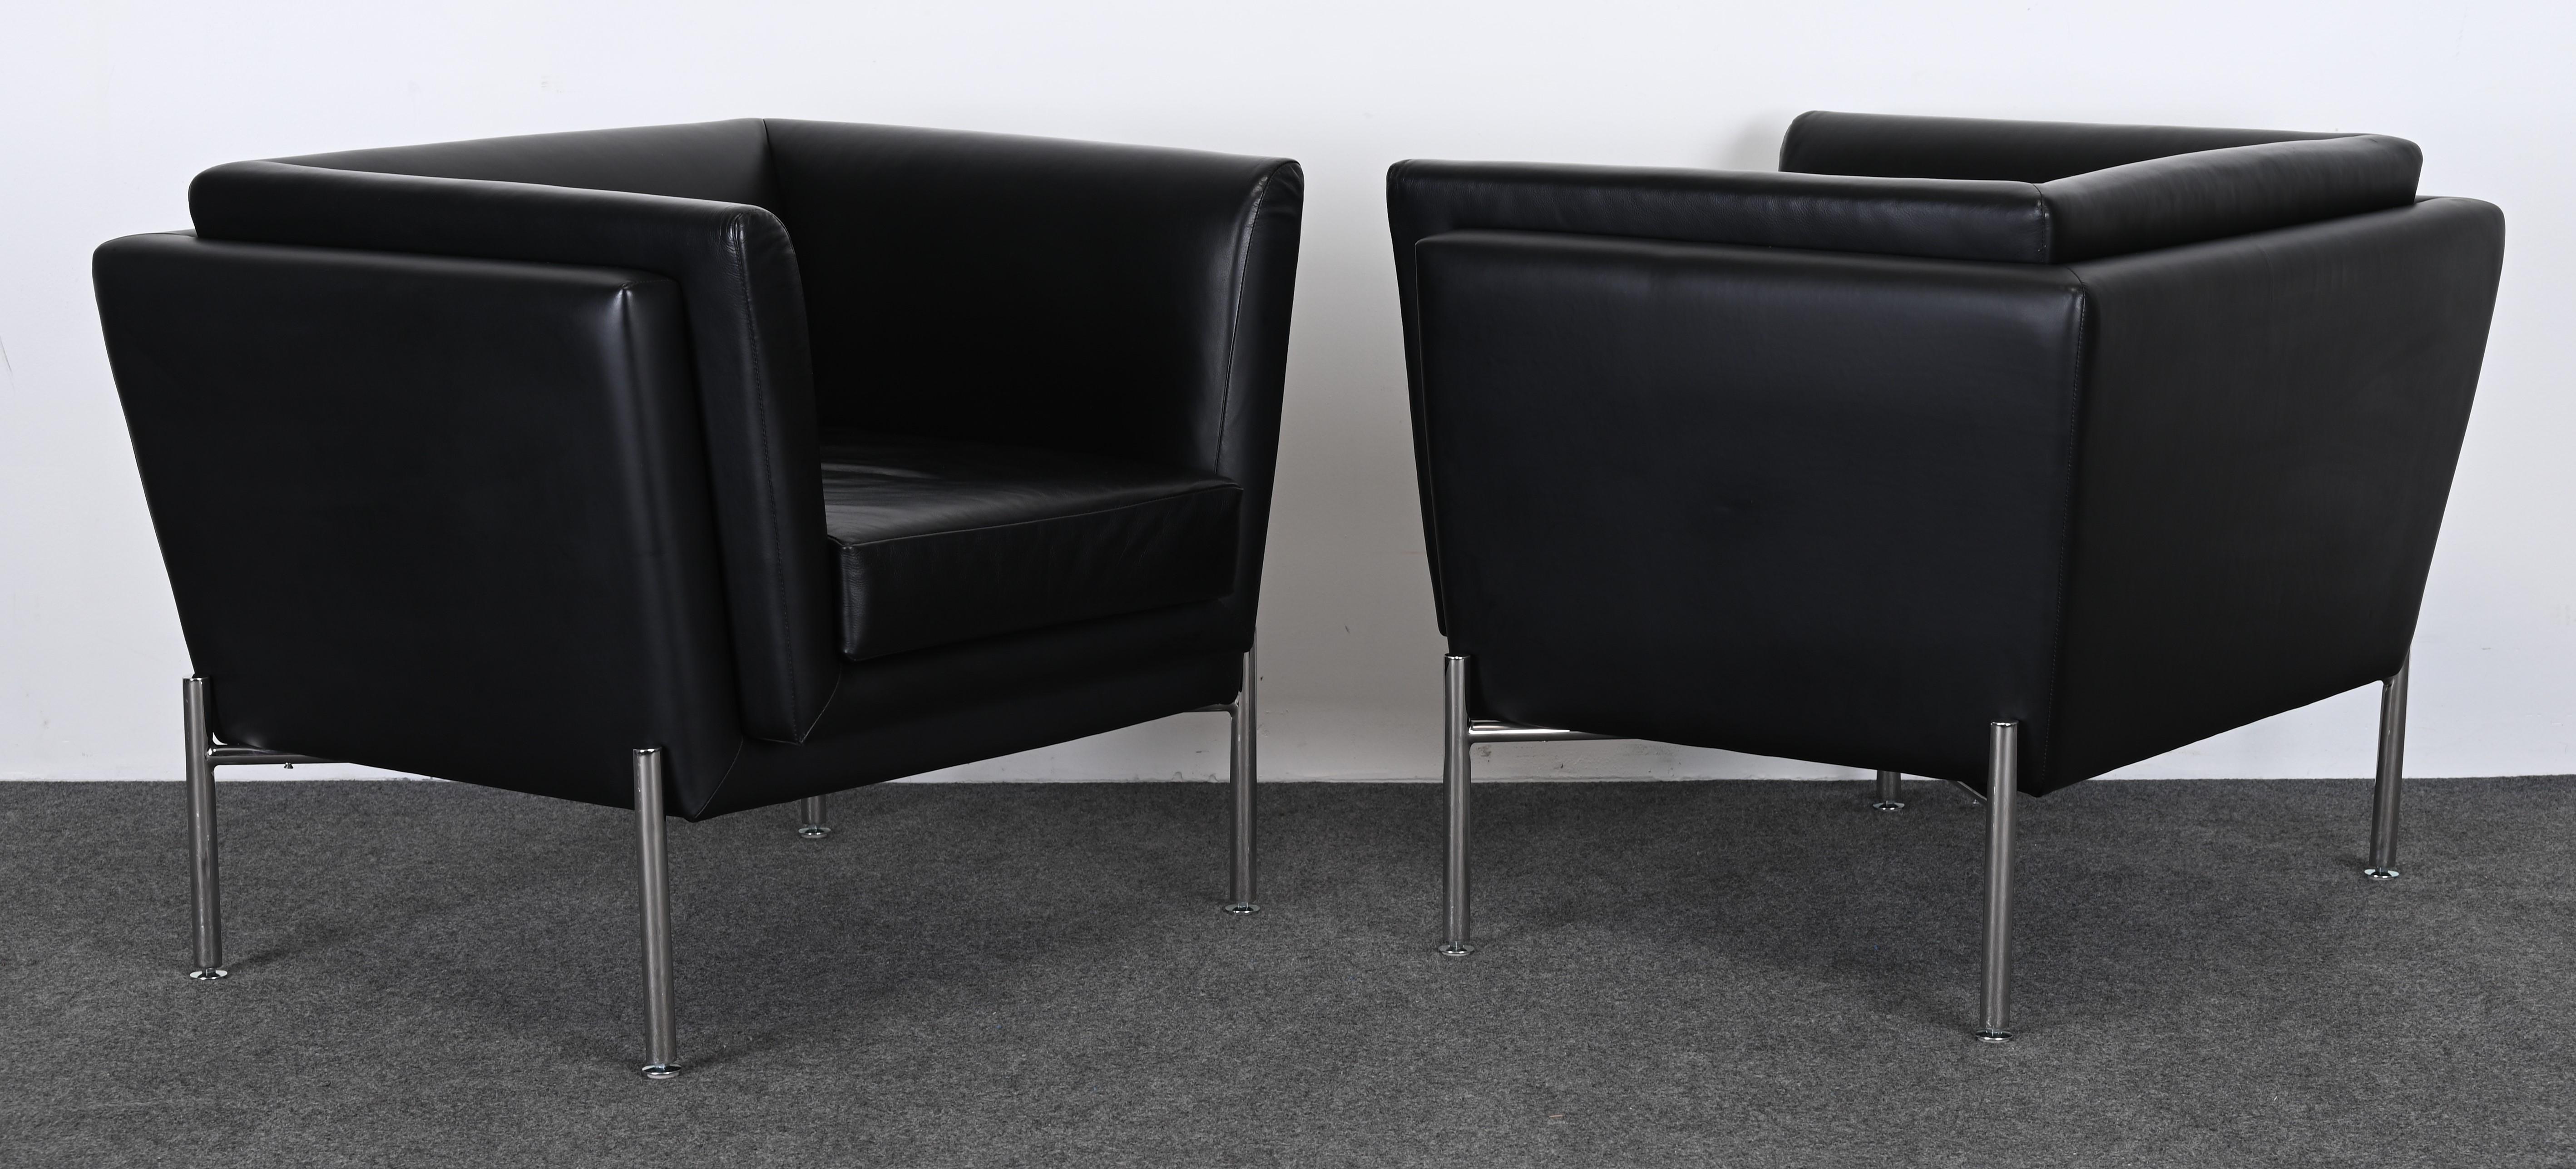 American Pair of Leather and Stainless Steel Lounge Chairs by Brueton, 20th Century For Sale